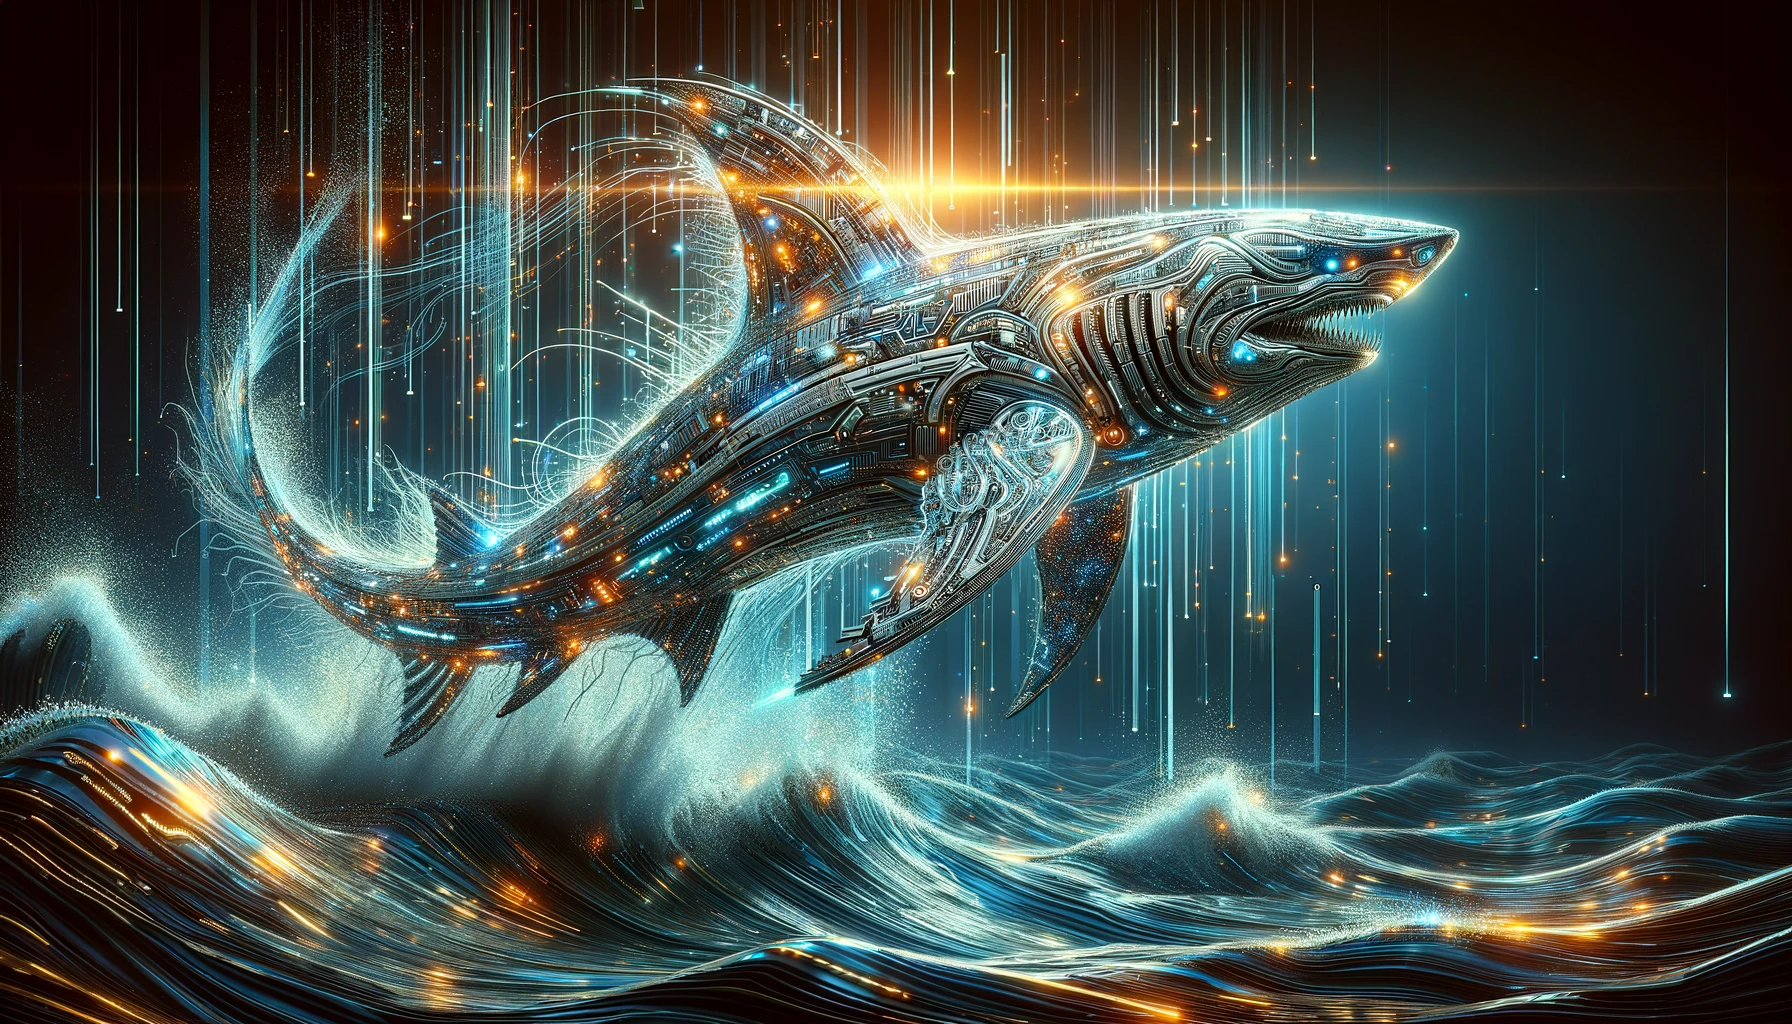 From coding to creativity: Generating AI-powered 'Code Shark' images